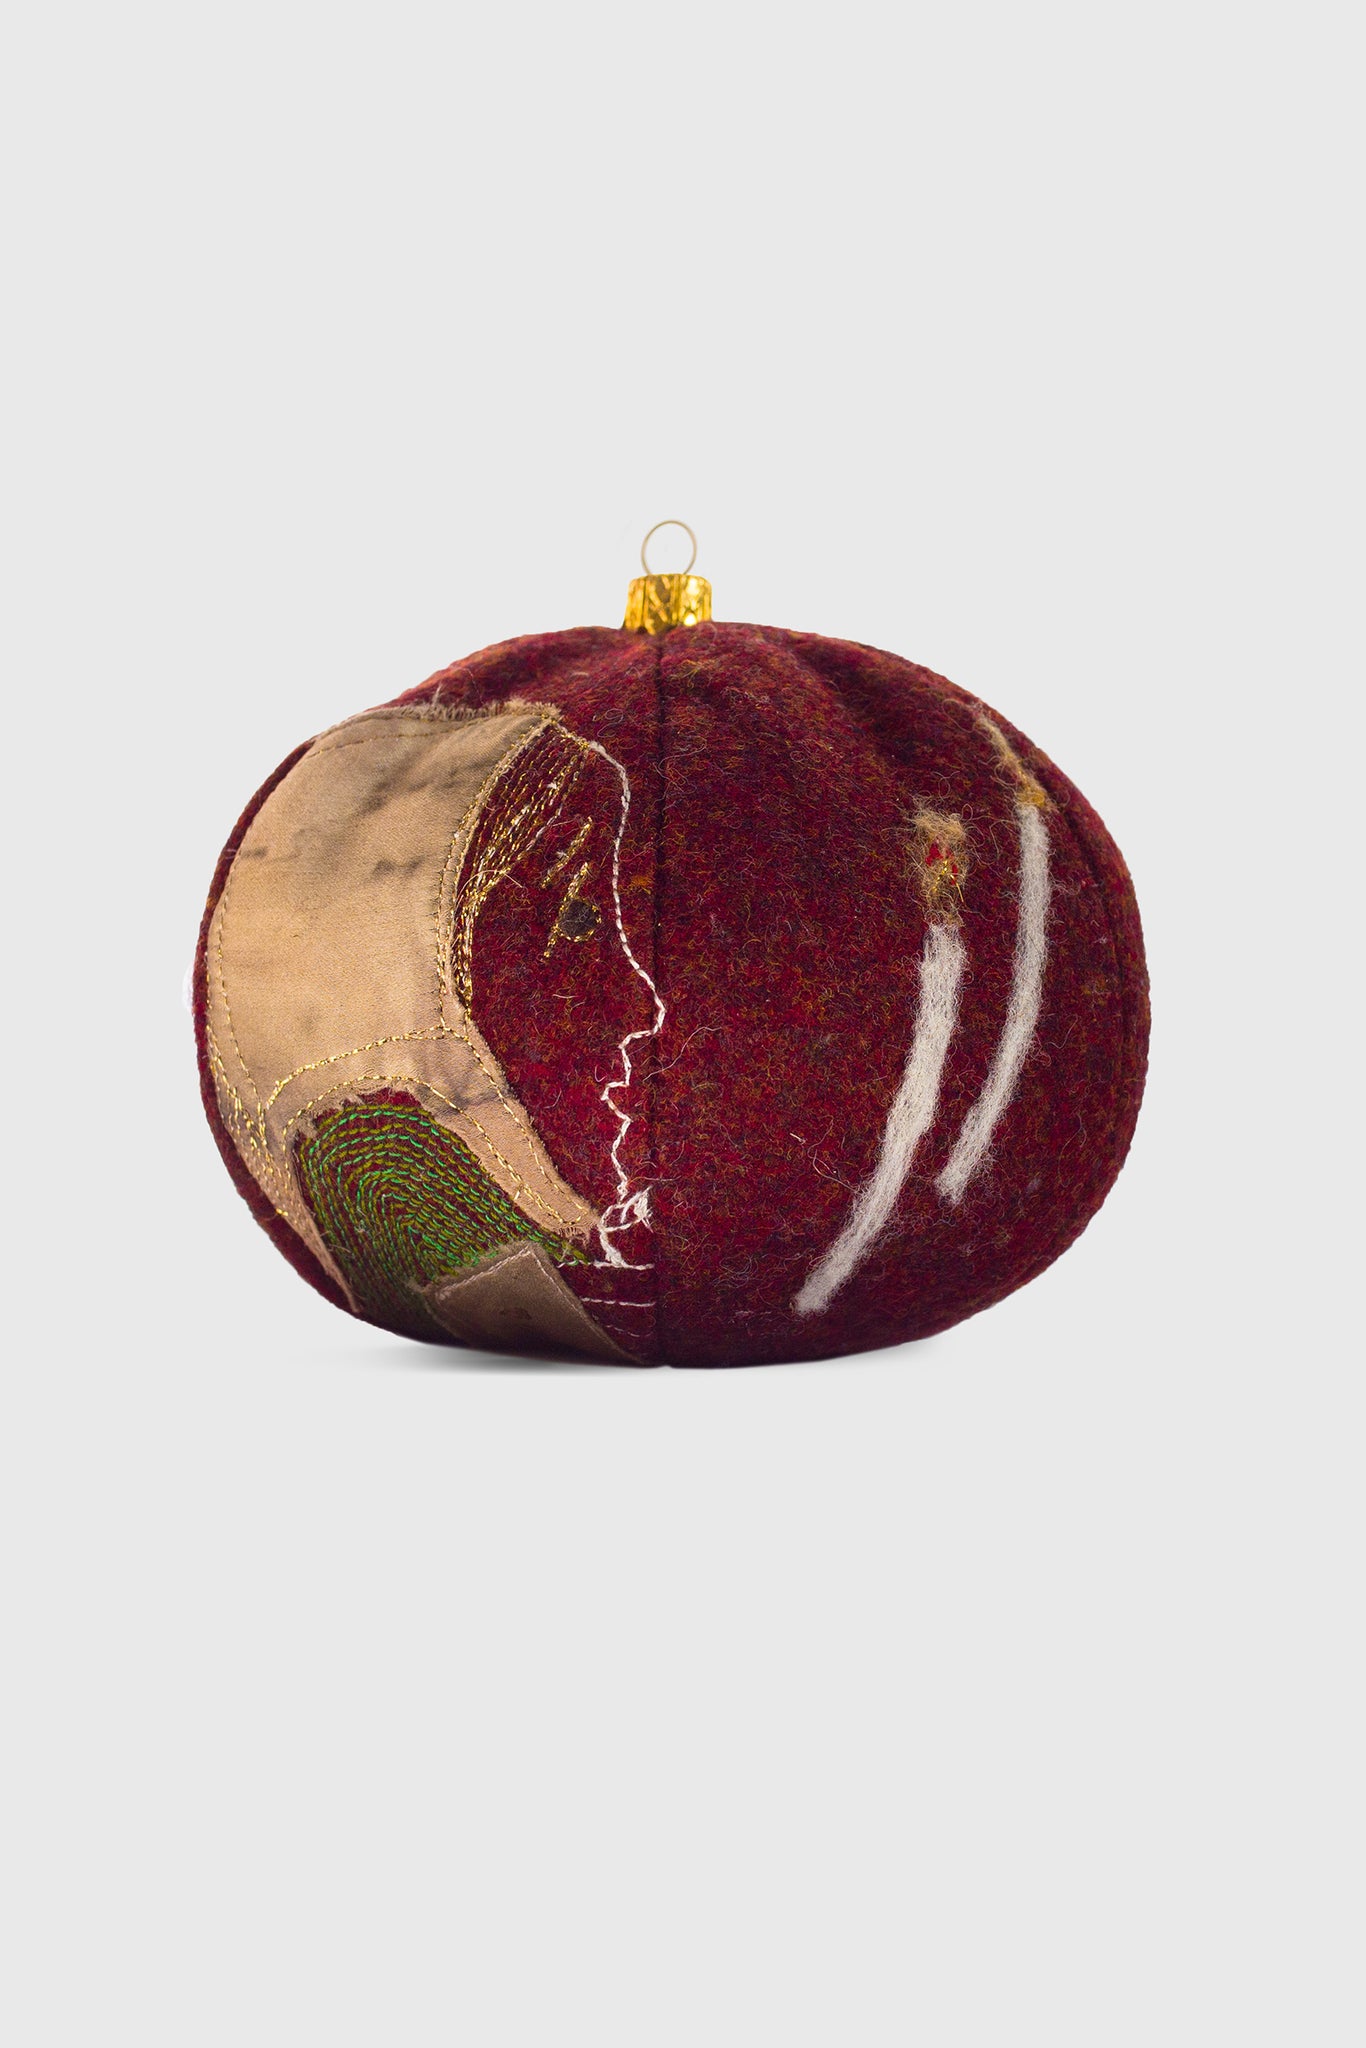 Ruxandra, charming tree ornament, felted portrait on a globe, the girl with the matches story, storytelling decoration, multicolored, red and earth tone colors